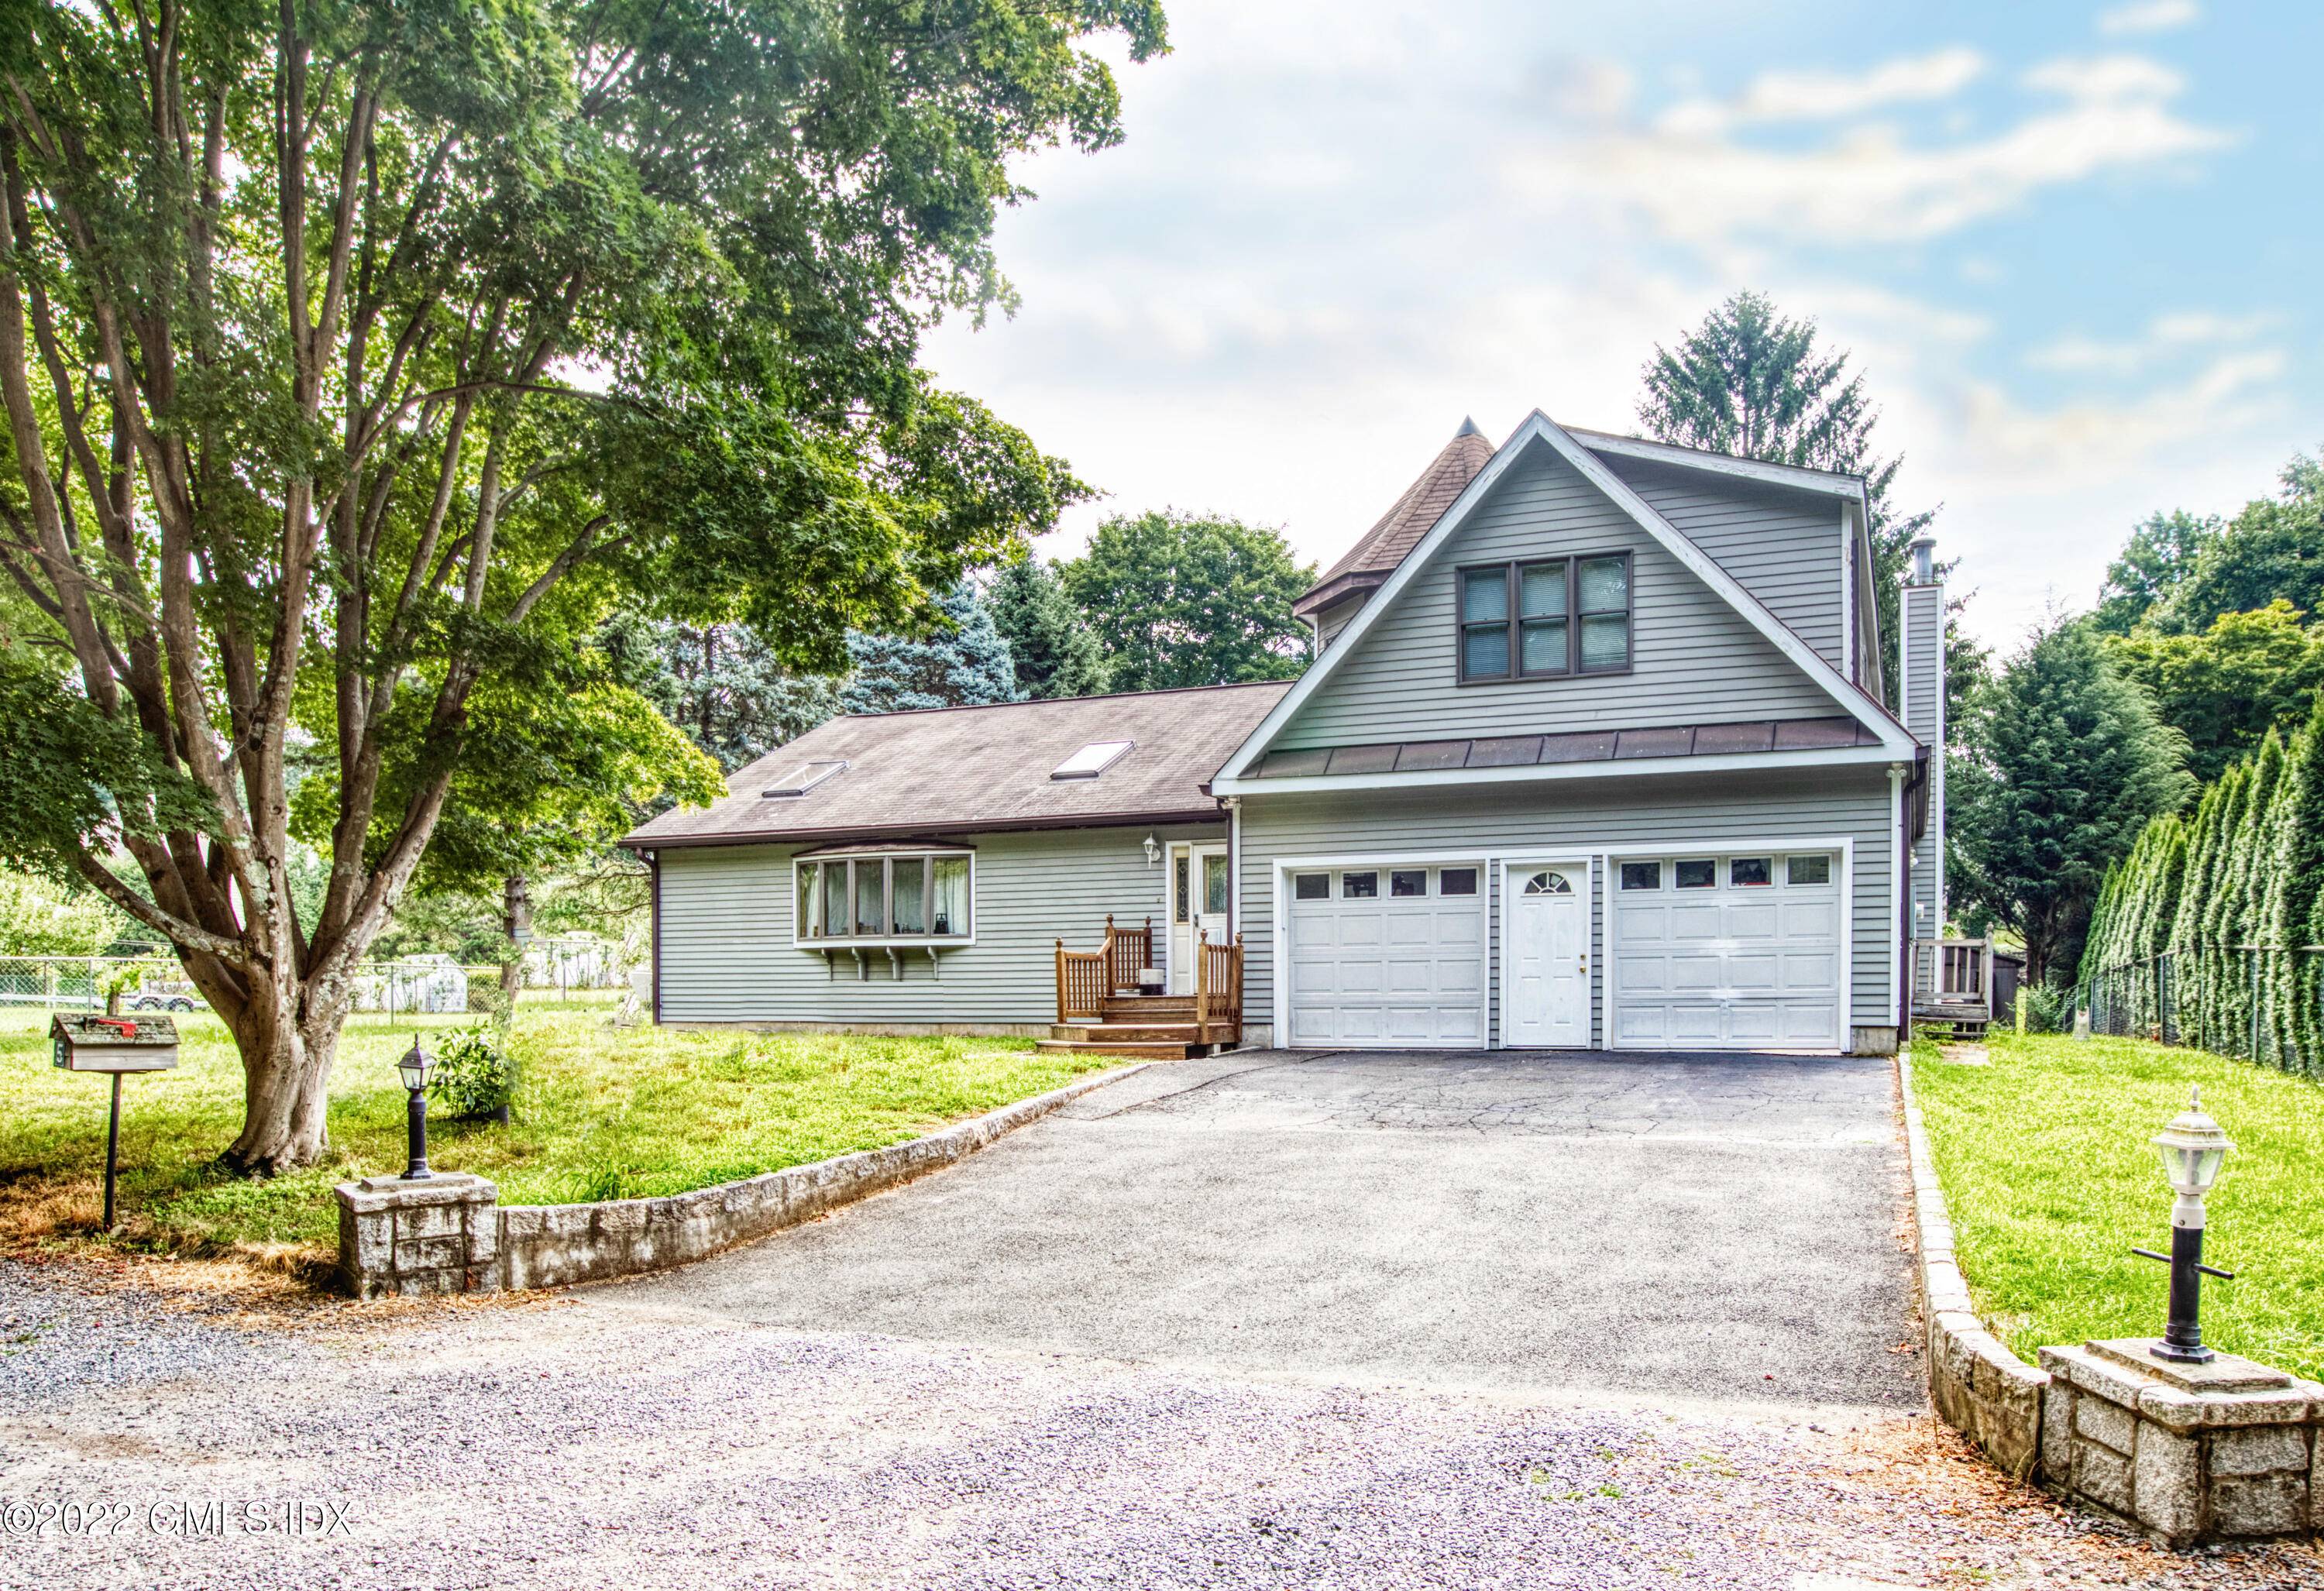 This charming colonial ranch in North Mianus is set on a beautiful, level, quarter acre at the end of a private road just minutes to town, schools and parks.